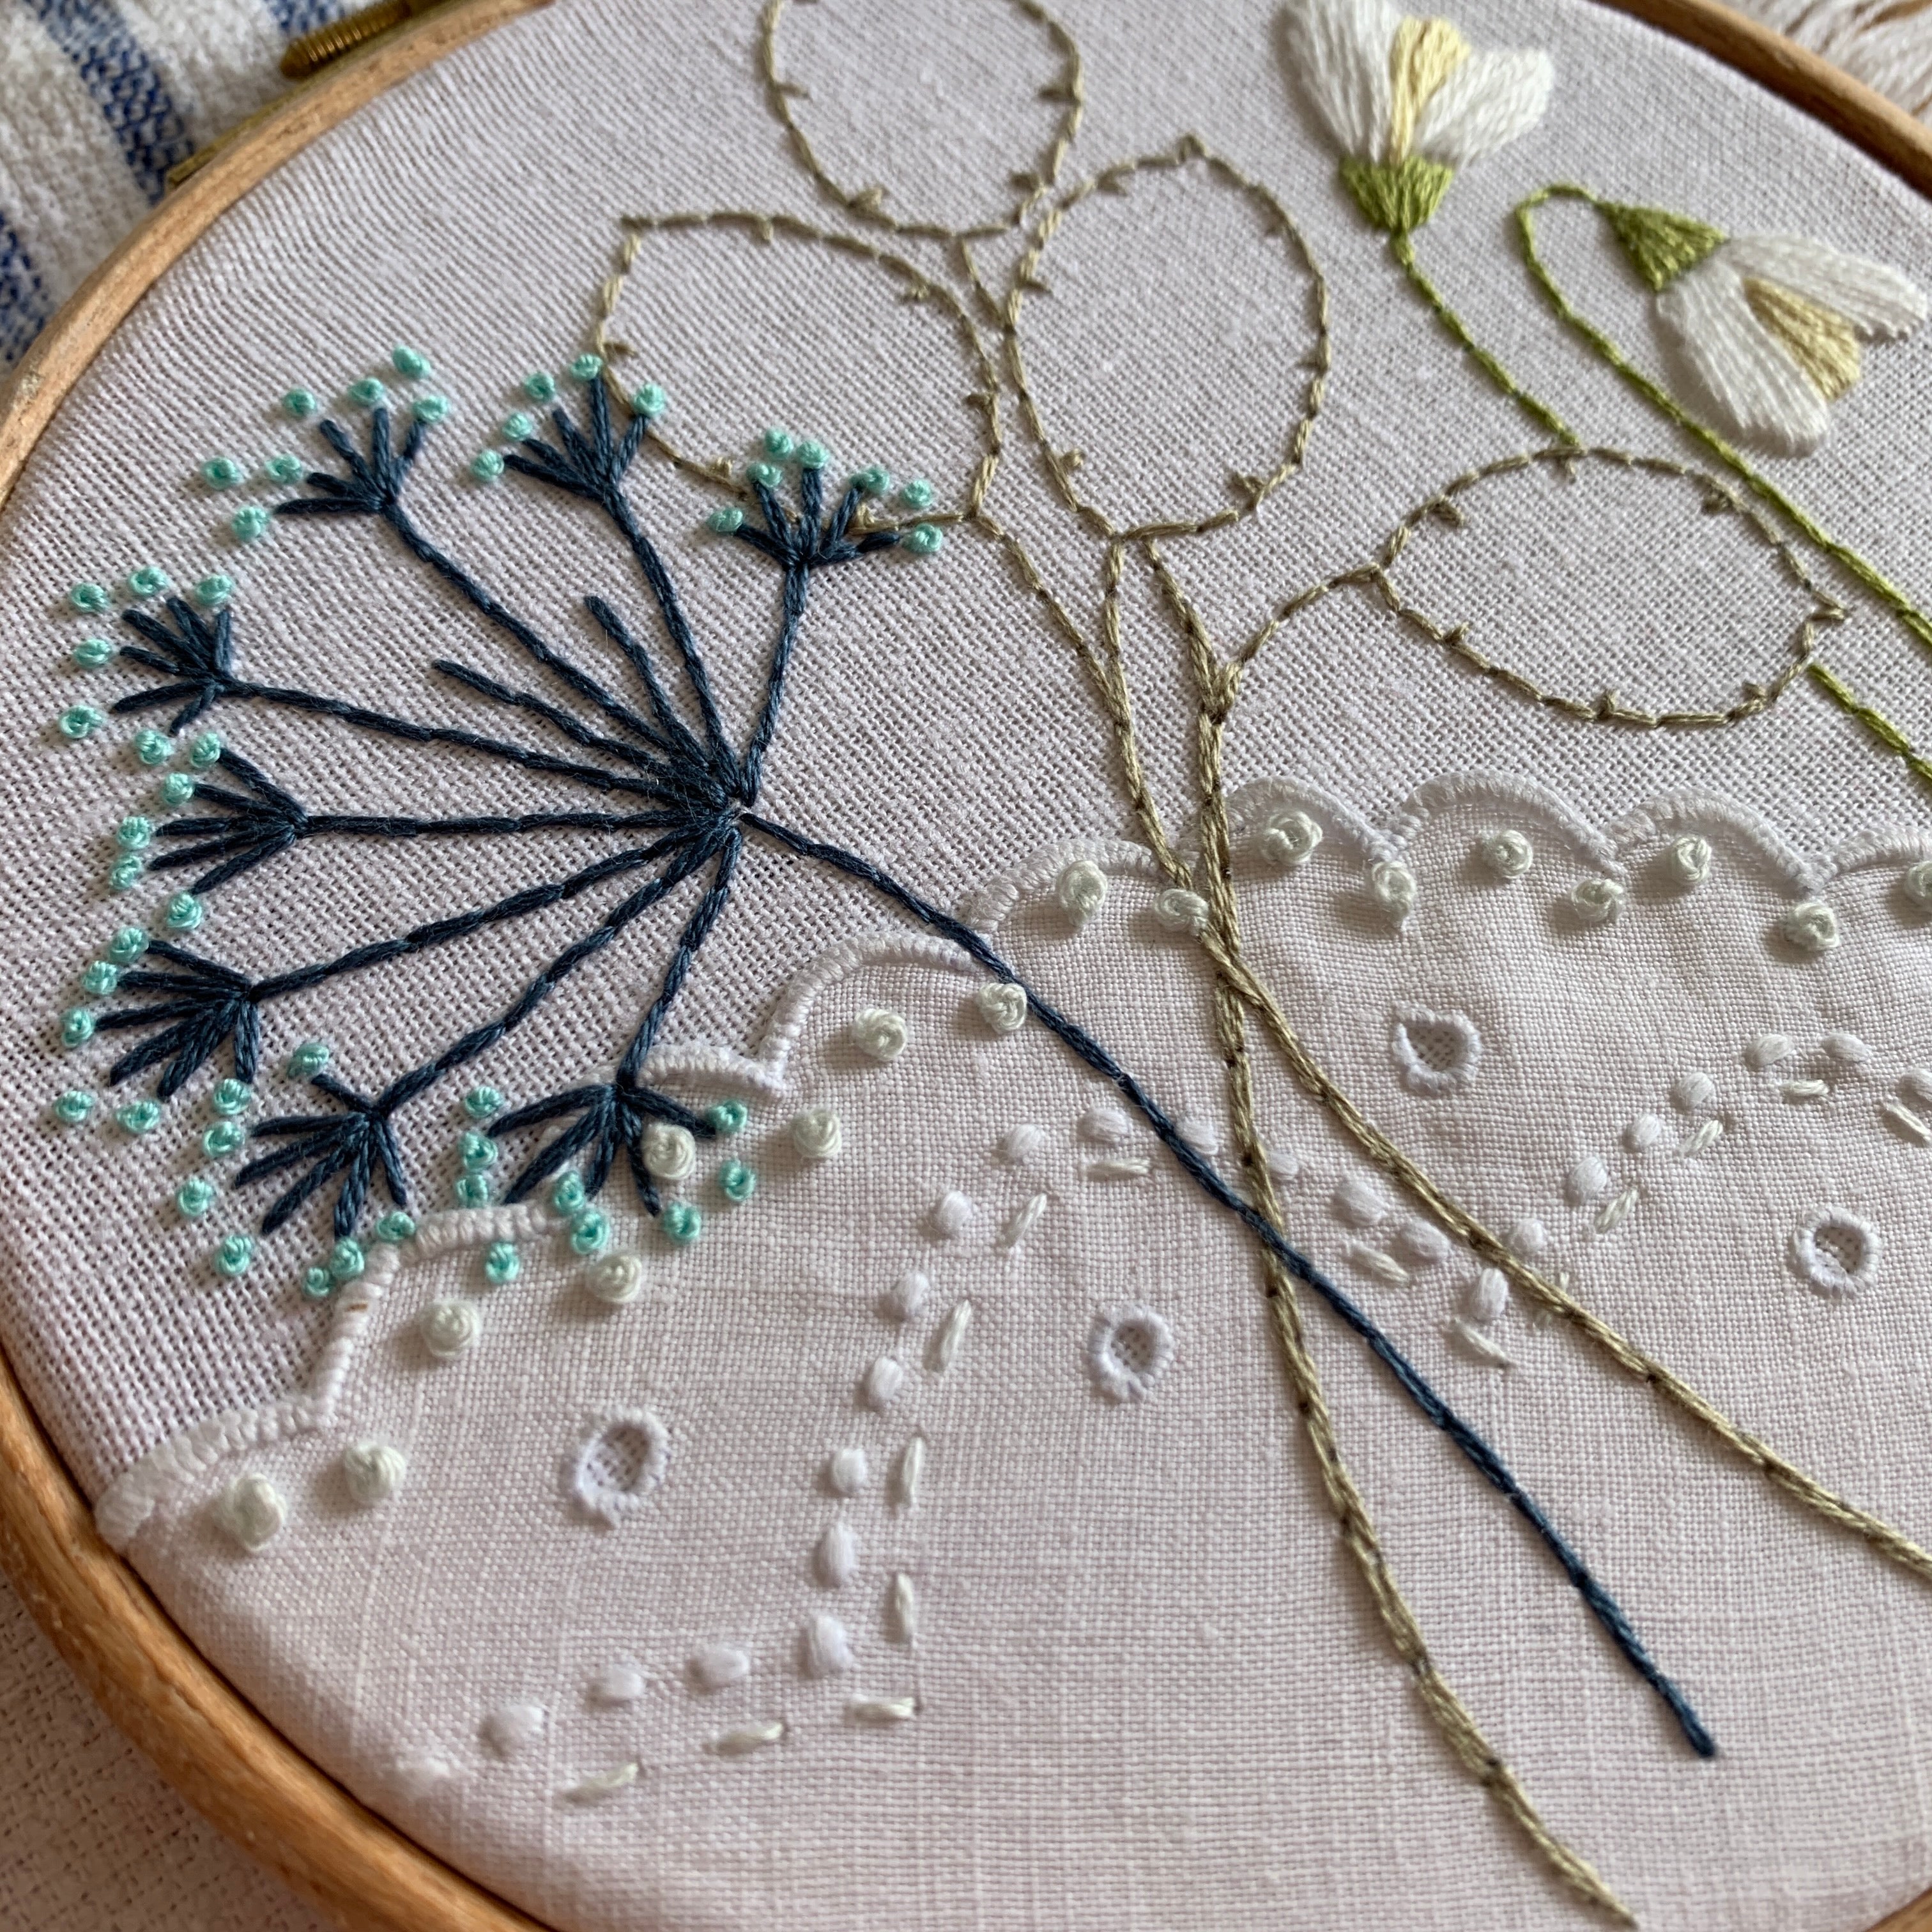 Snowdrop and honesty hand embroidery with lace.